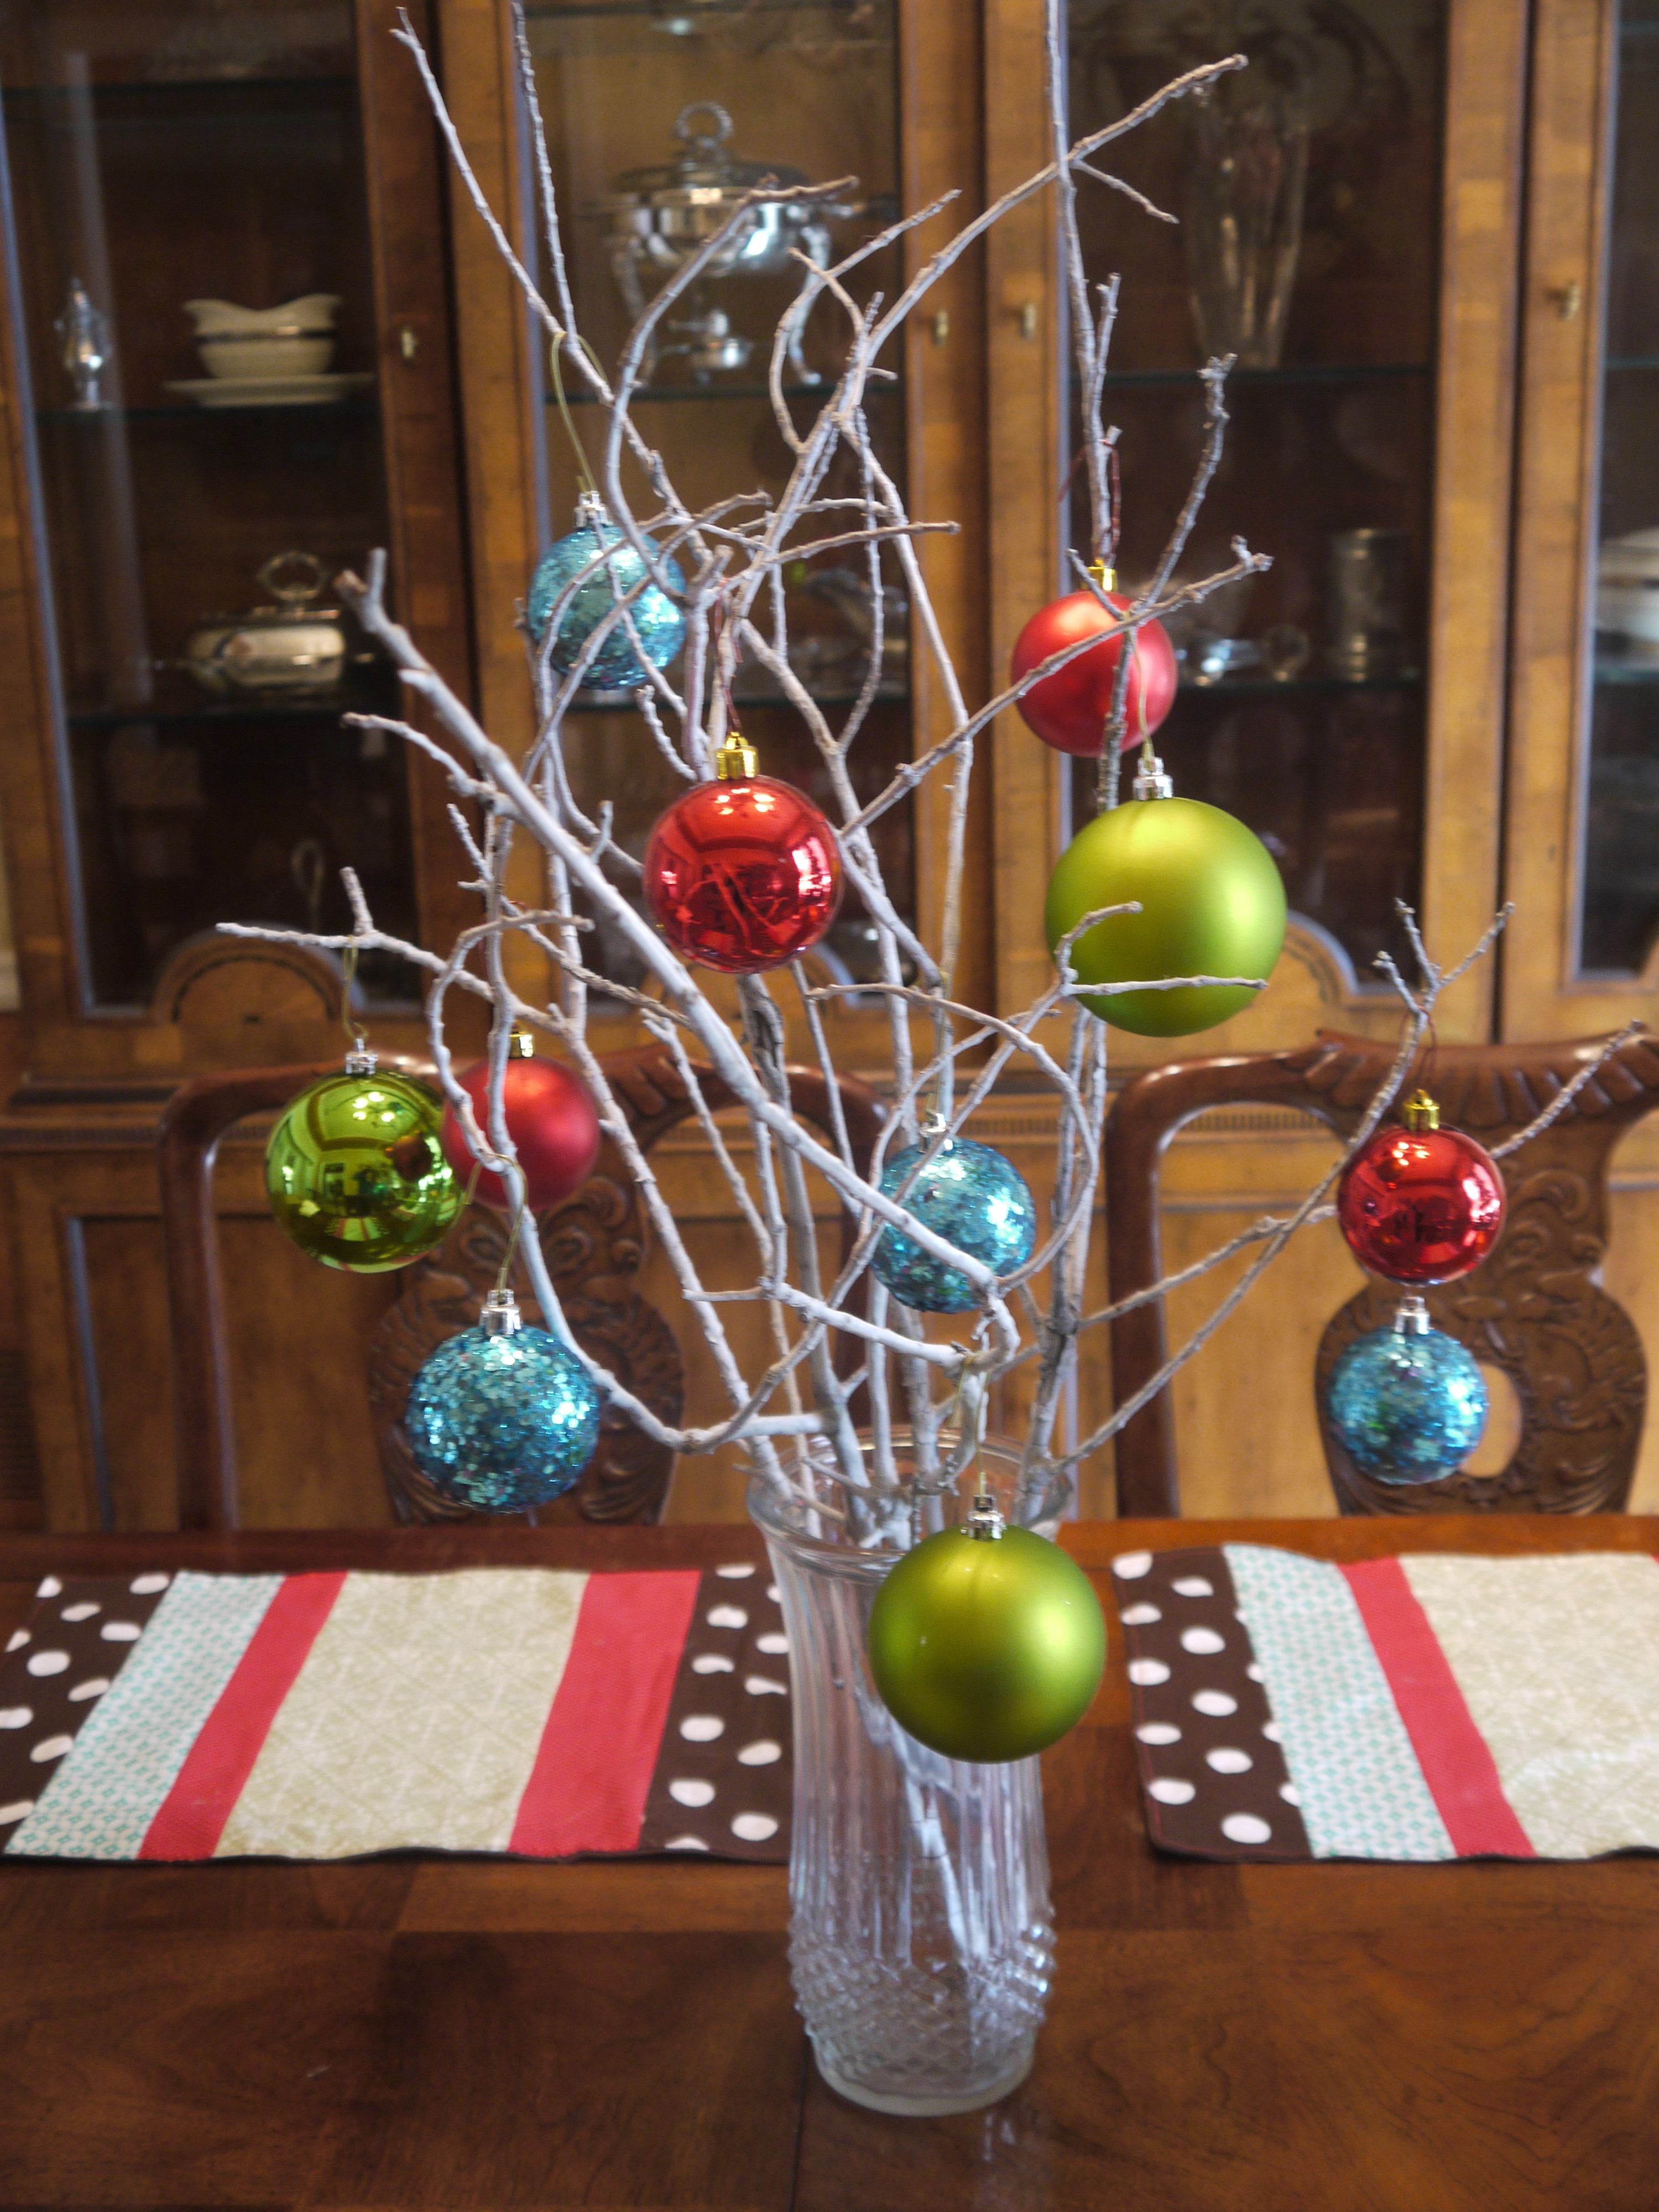 Cheap DIY Christmas Decorations
 70 Christmas Decorations Ideas To Try This Year A DIY